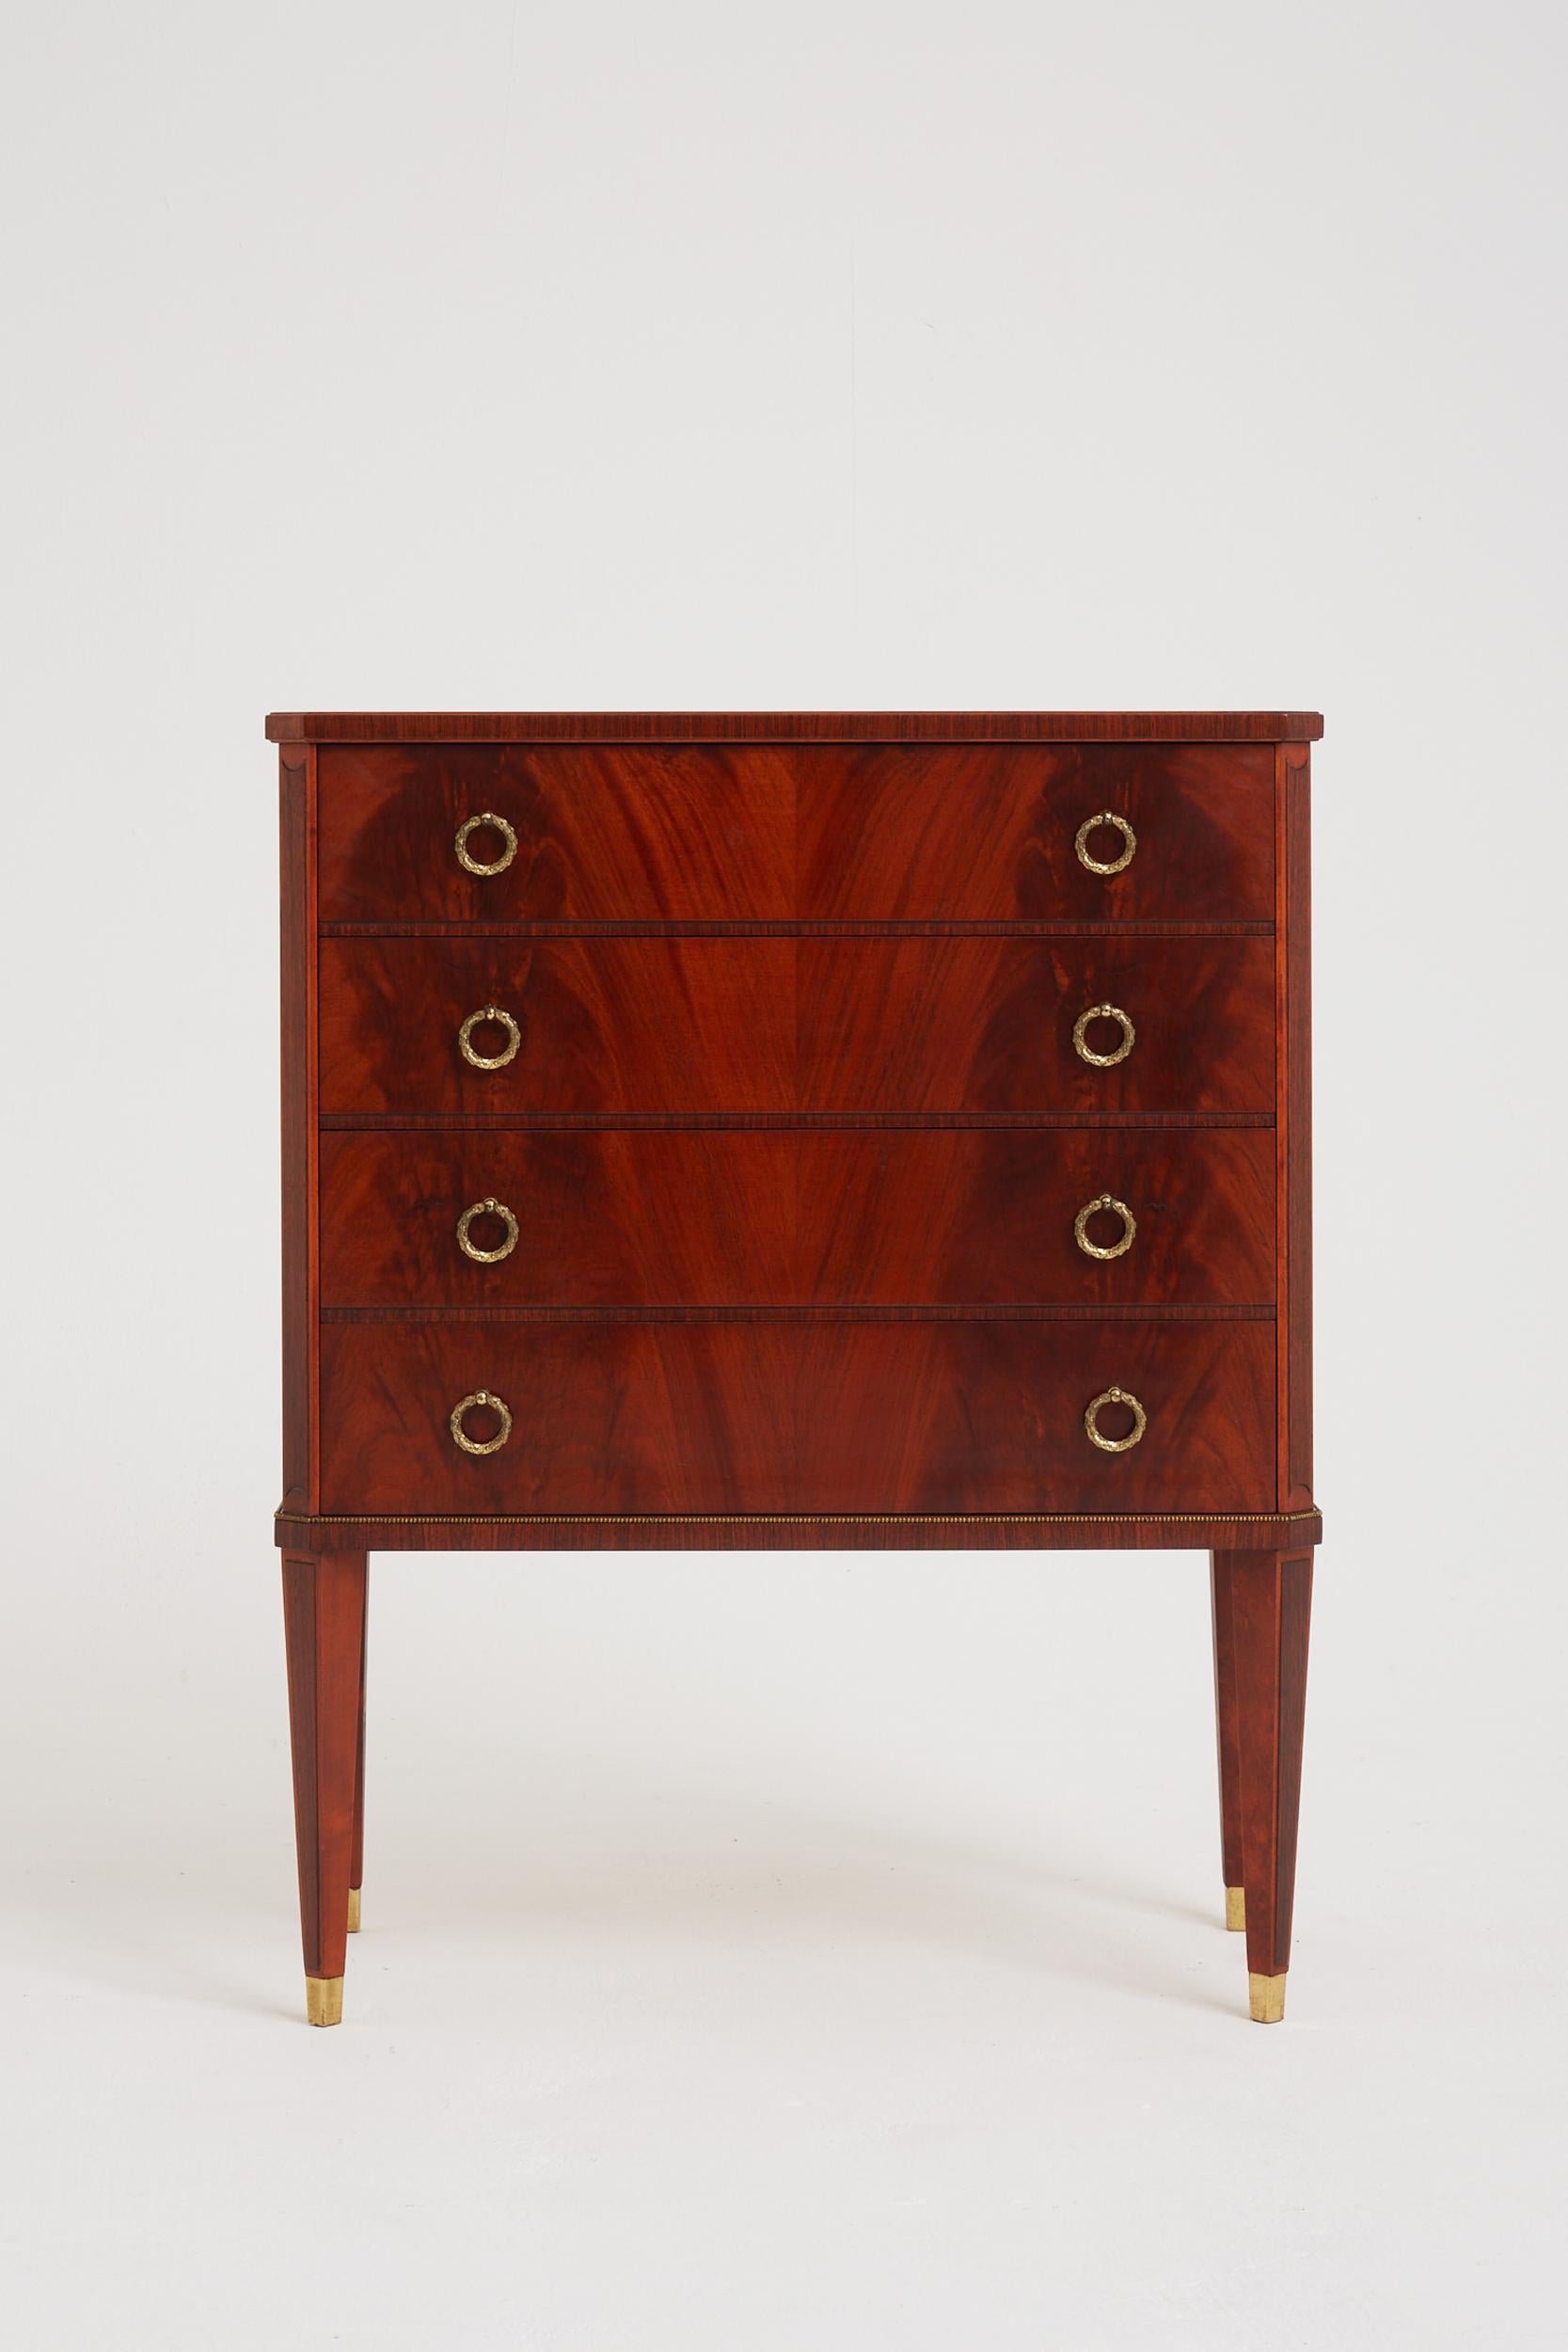 A flamed mahogany and brass chest of drawers
Sweden, mid 20th Century
82 cm high by 66.5 cm wide by 34.5 cm depth